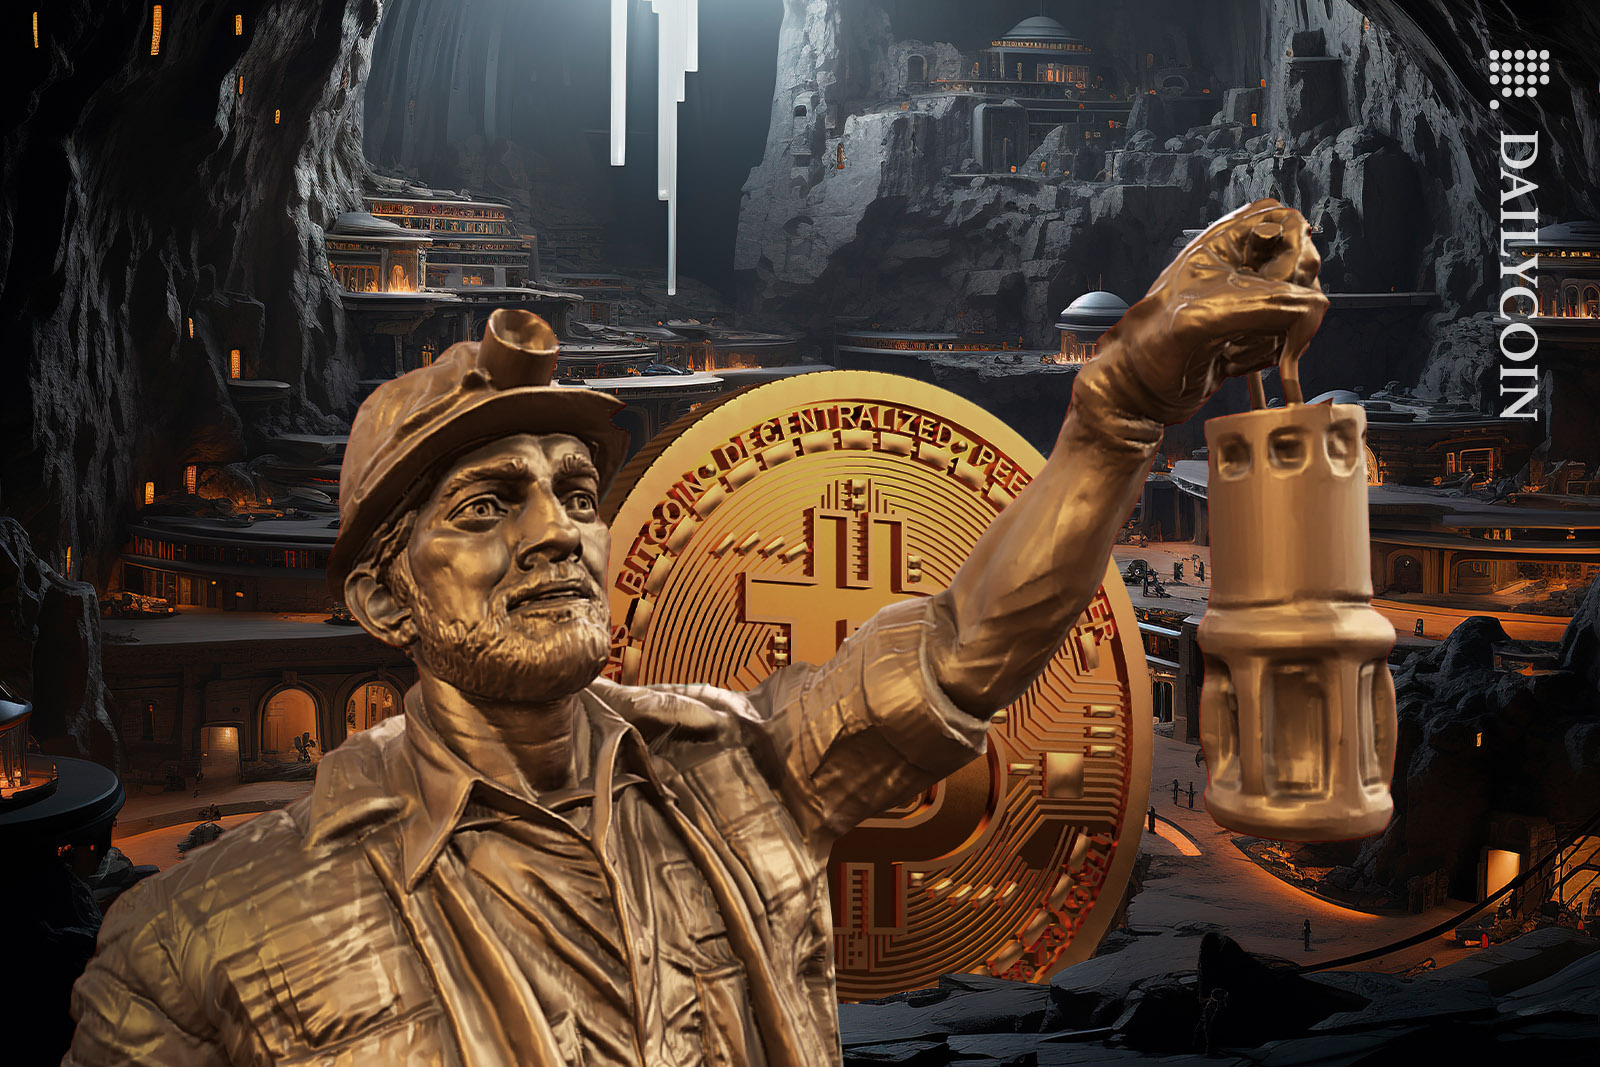 The golden age of Bitcoin Mining - a miner reached Bitcoin city and froze in gold.